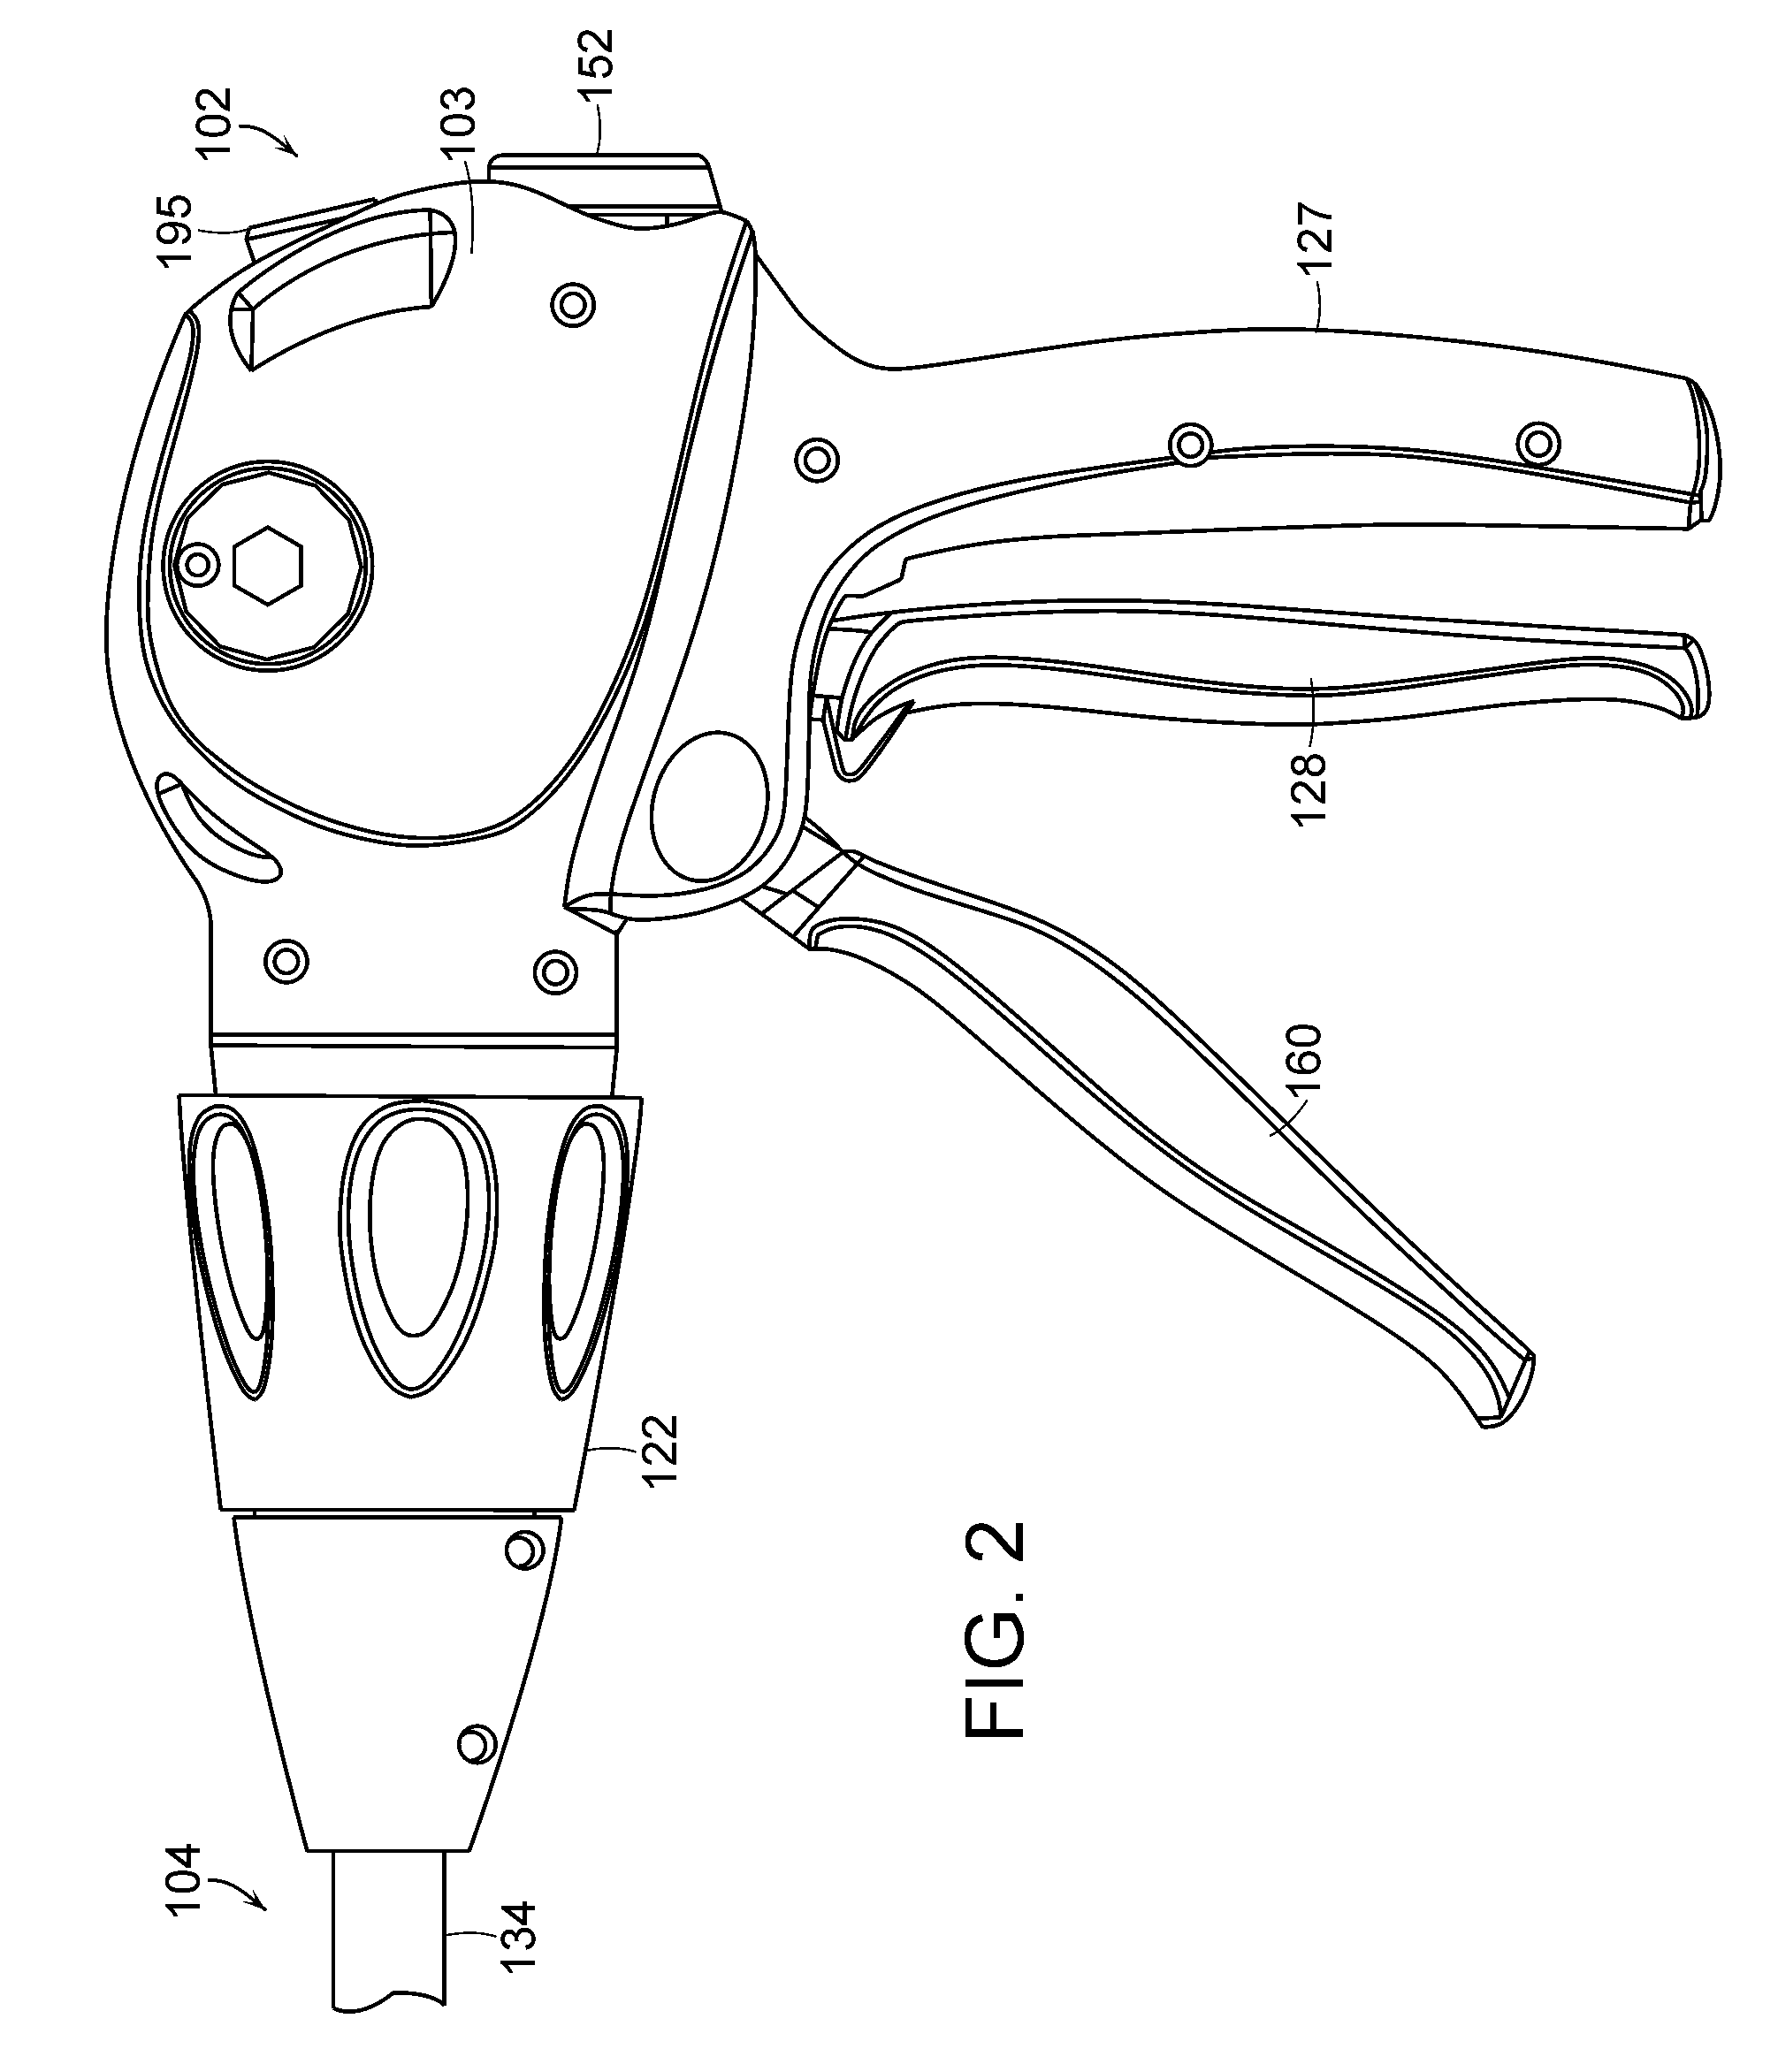 Surgical stapling instrument with an anti-back up mechanism